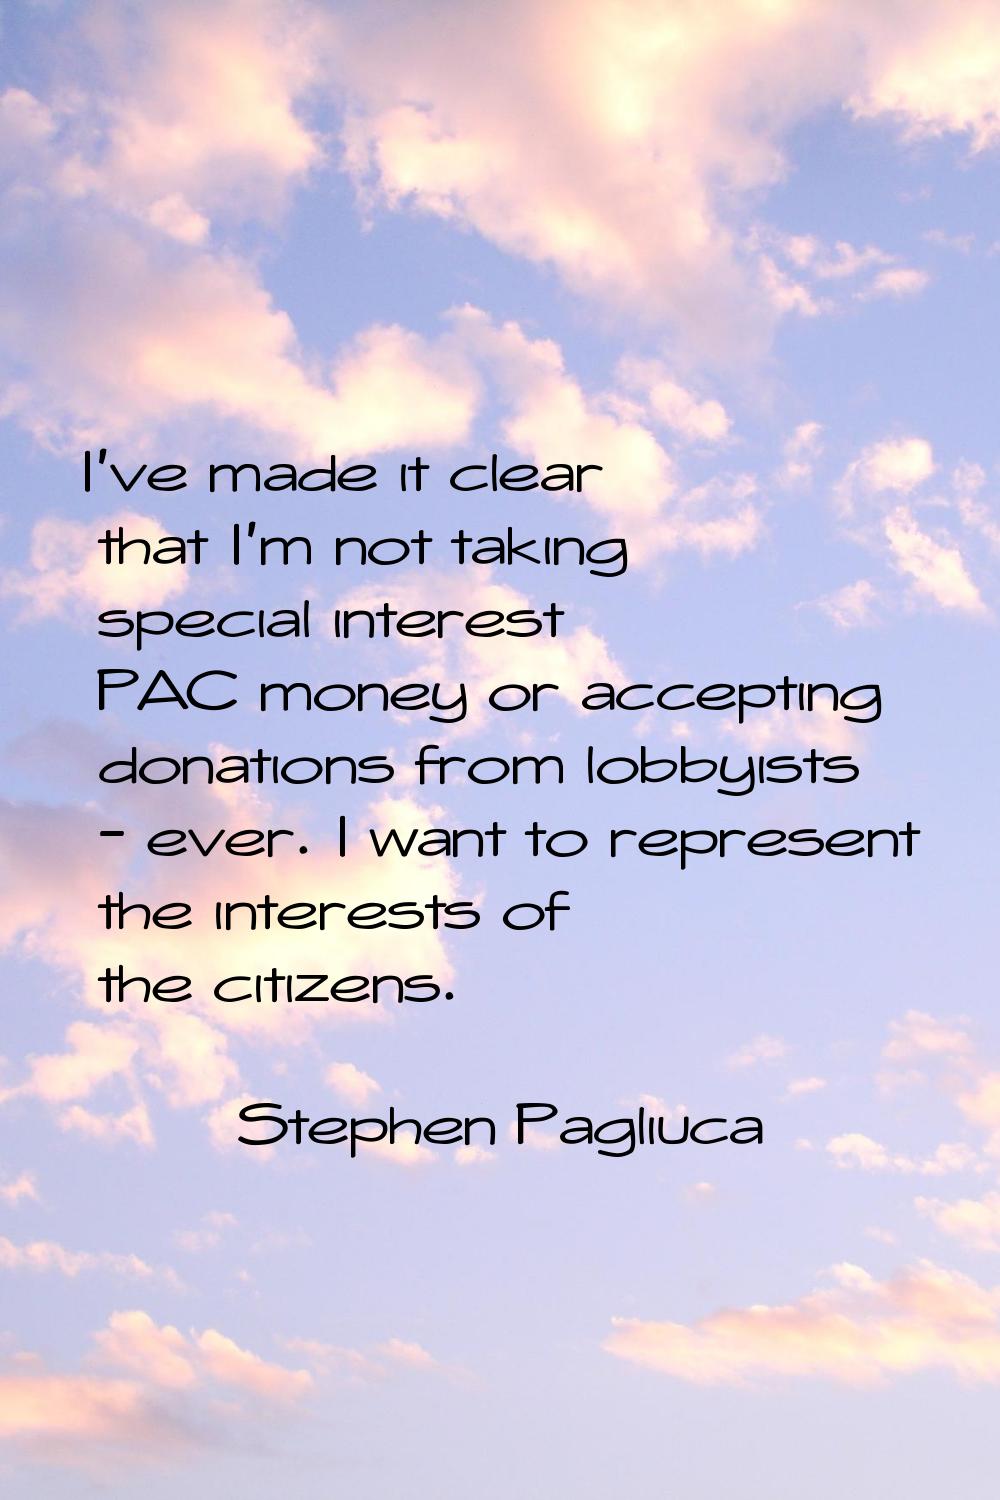 I've made it clear that I'm not taking special interest PAC money or accepting donations from lobby